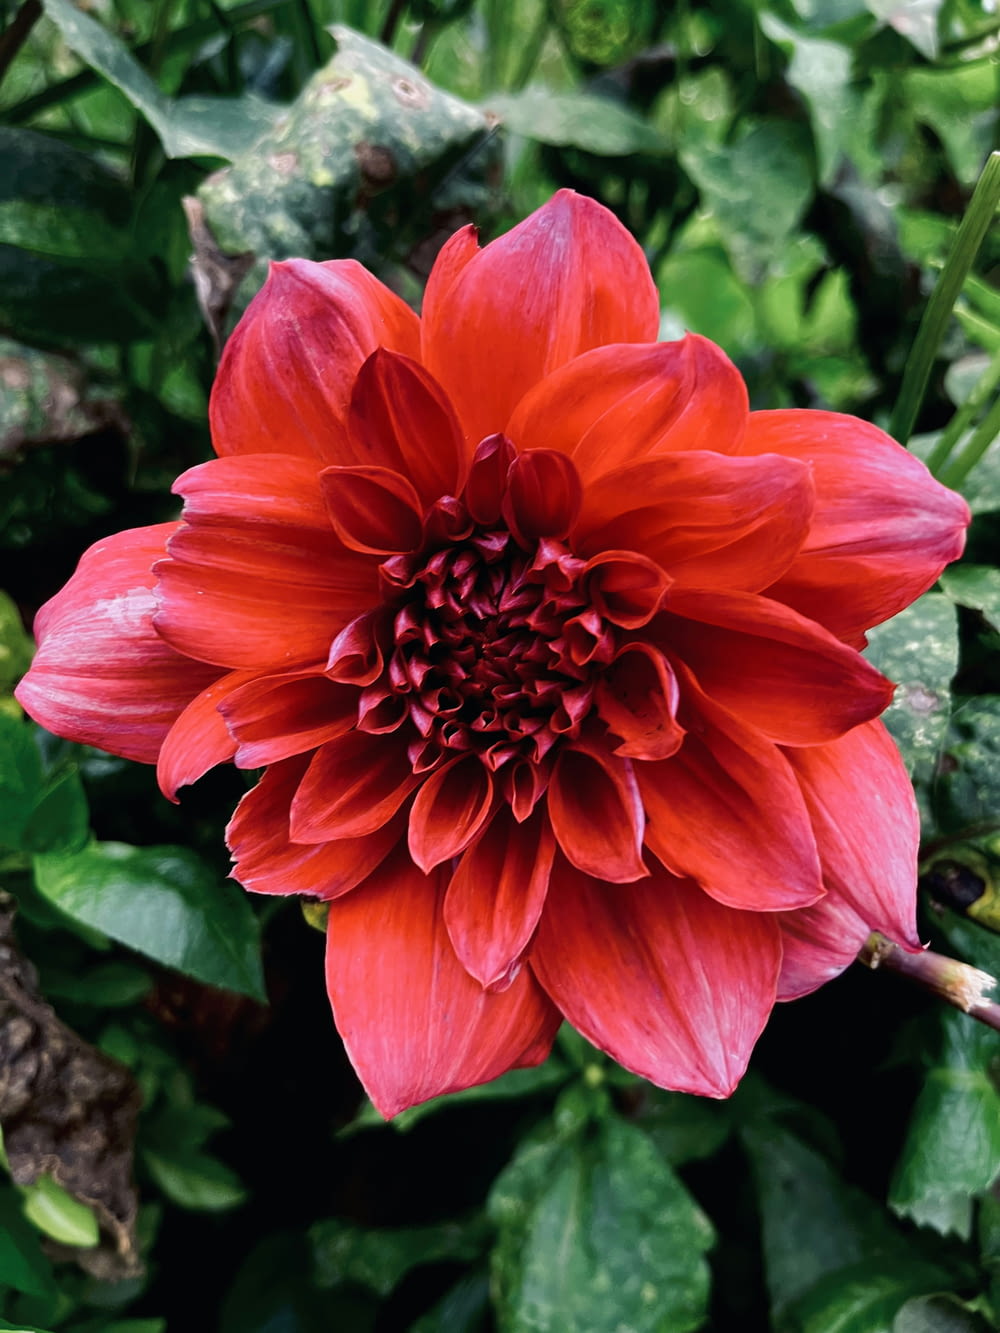 a large red flower surrounded by green leaves